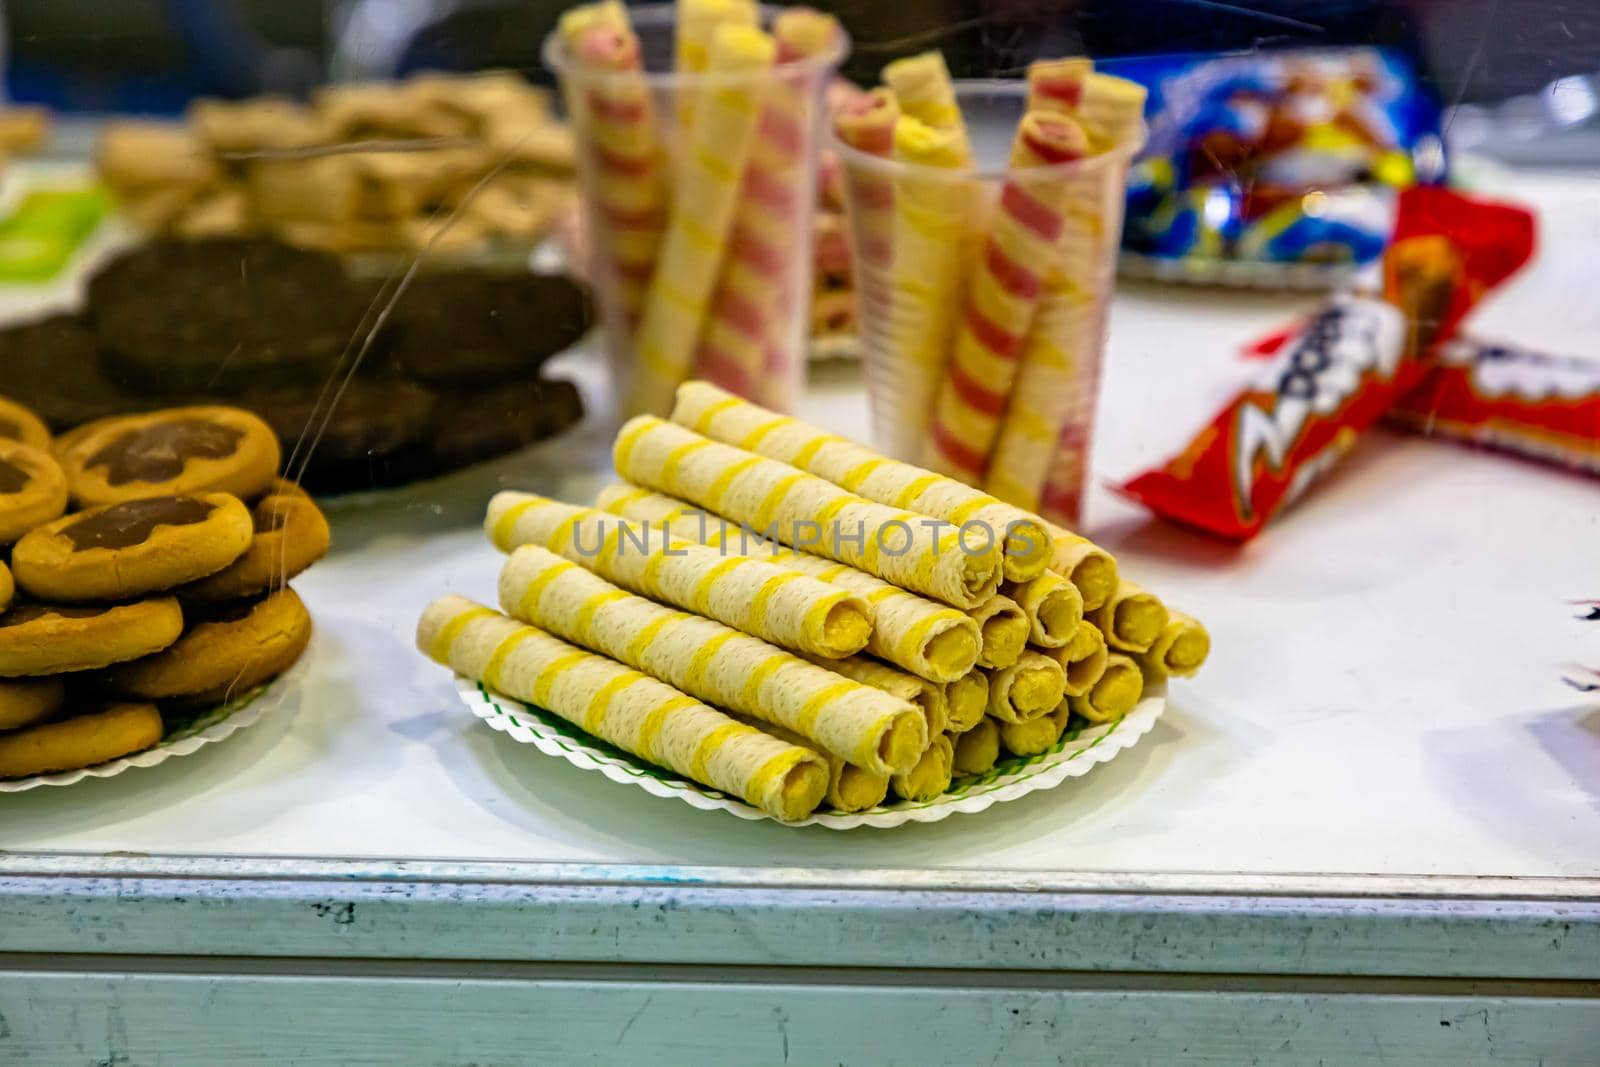 Waffle tubes are on display in a pastry shop by Milanchikov